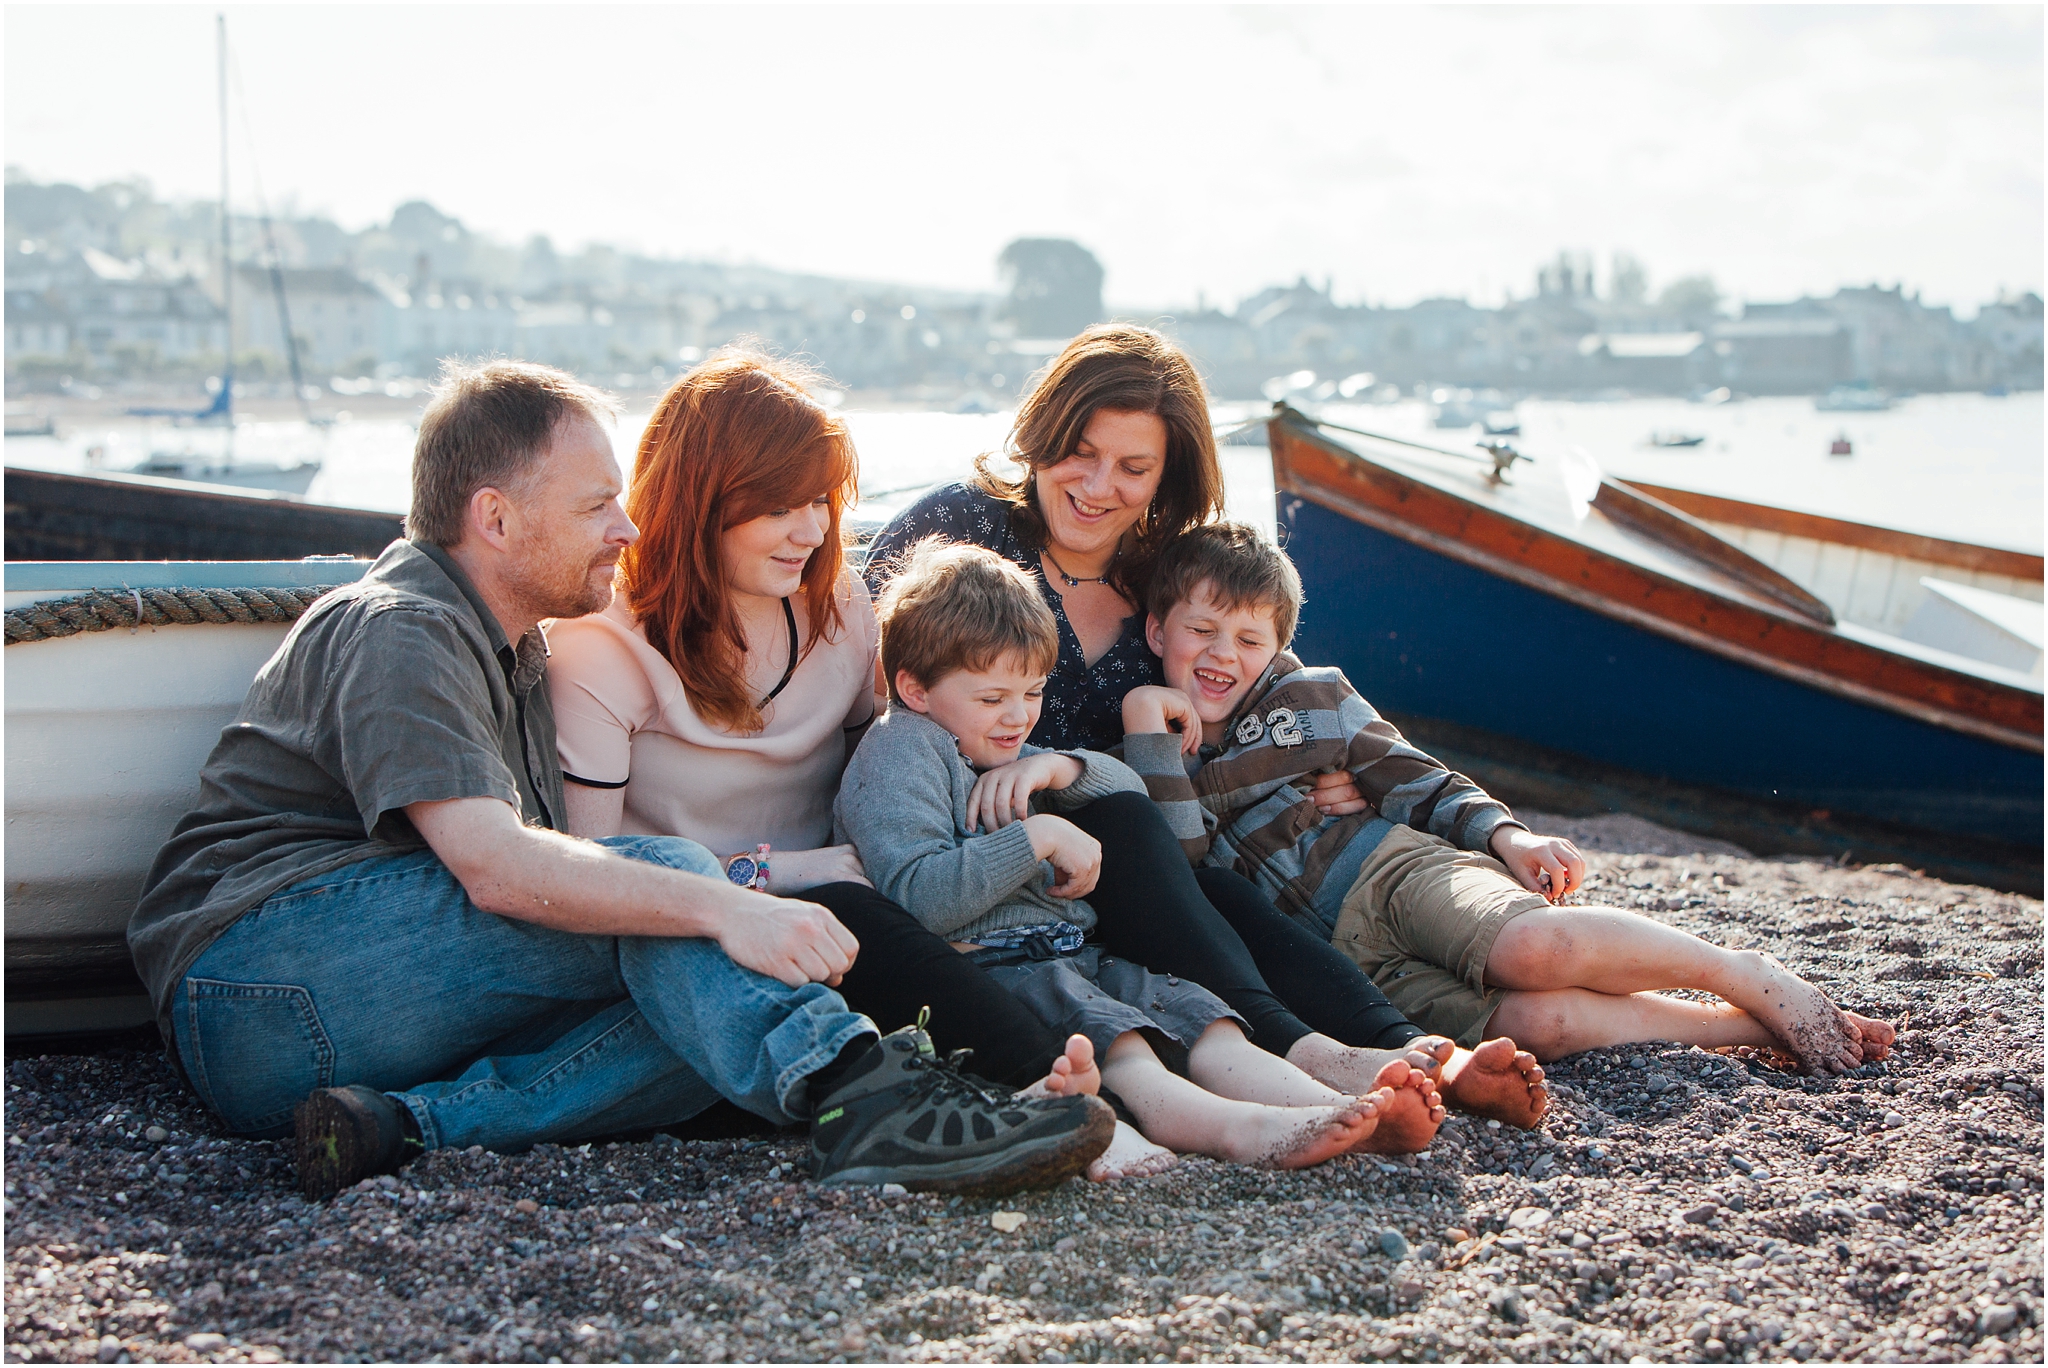 Photographer Helen Lisk with her family sitting on the beach in Teignmouth, Devon